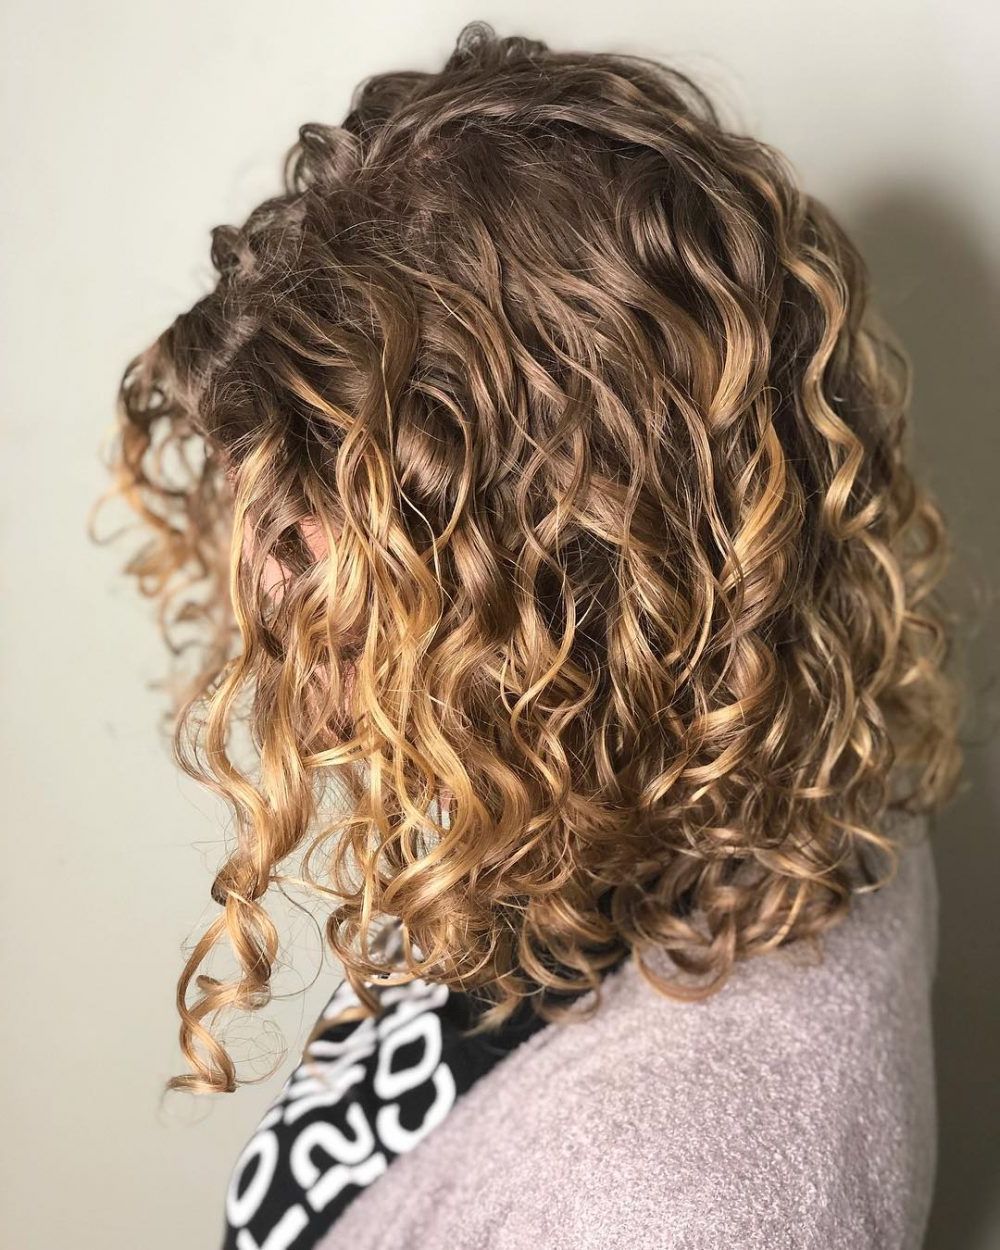 30 Gorgeous Medium Length Curly Hairstyles For Women In 2019 Within Widely Used Big Curls Medium Hairstyles (View 13 of 20)